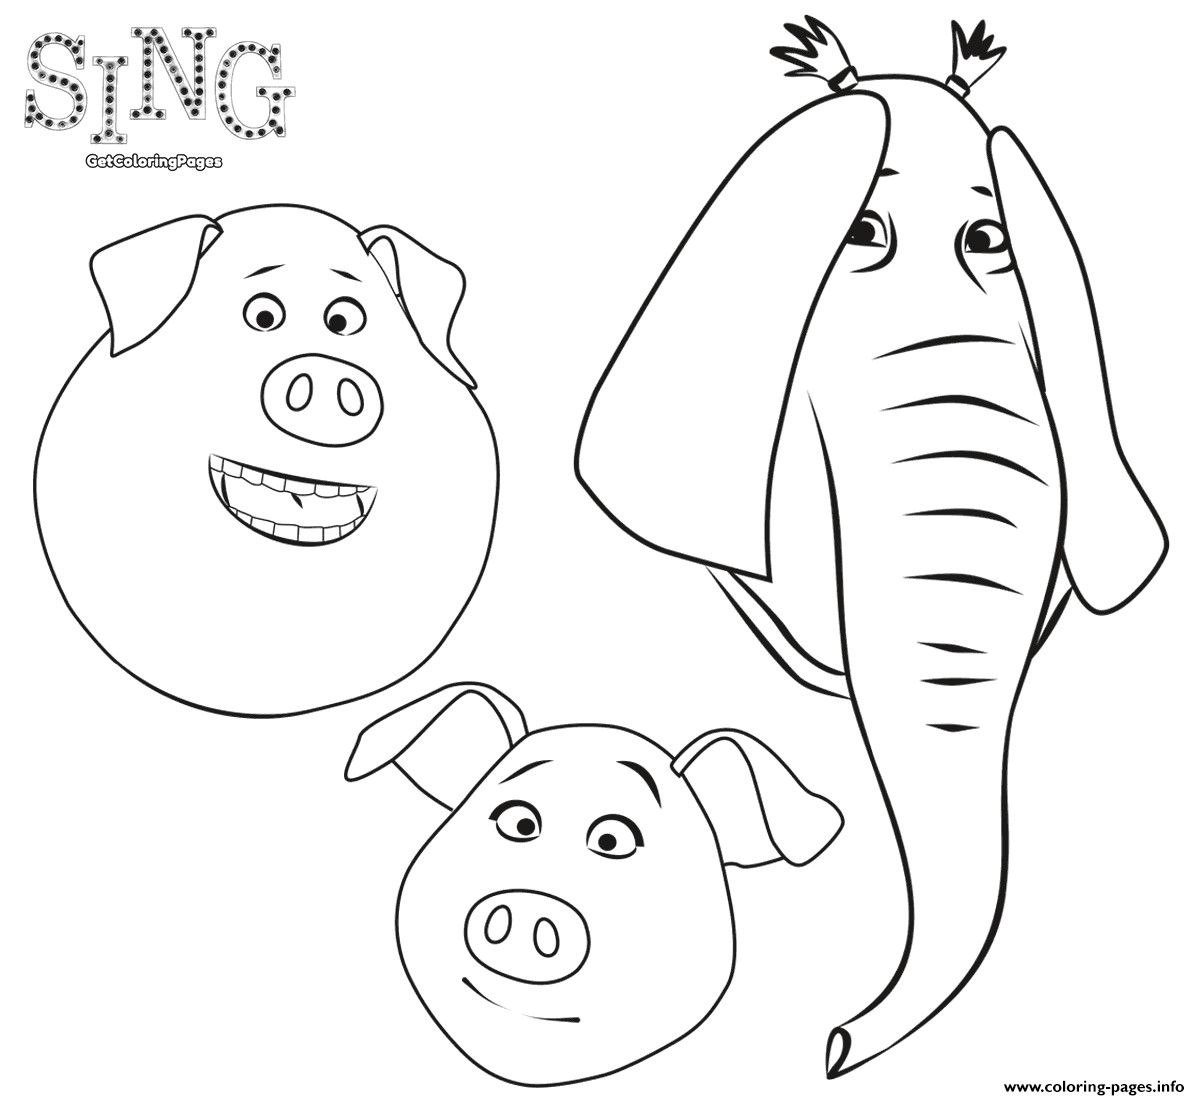 Sing Coloring Pages at GetColorings.com | Free printable colorings